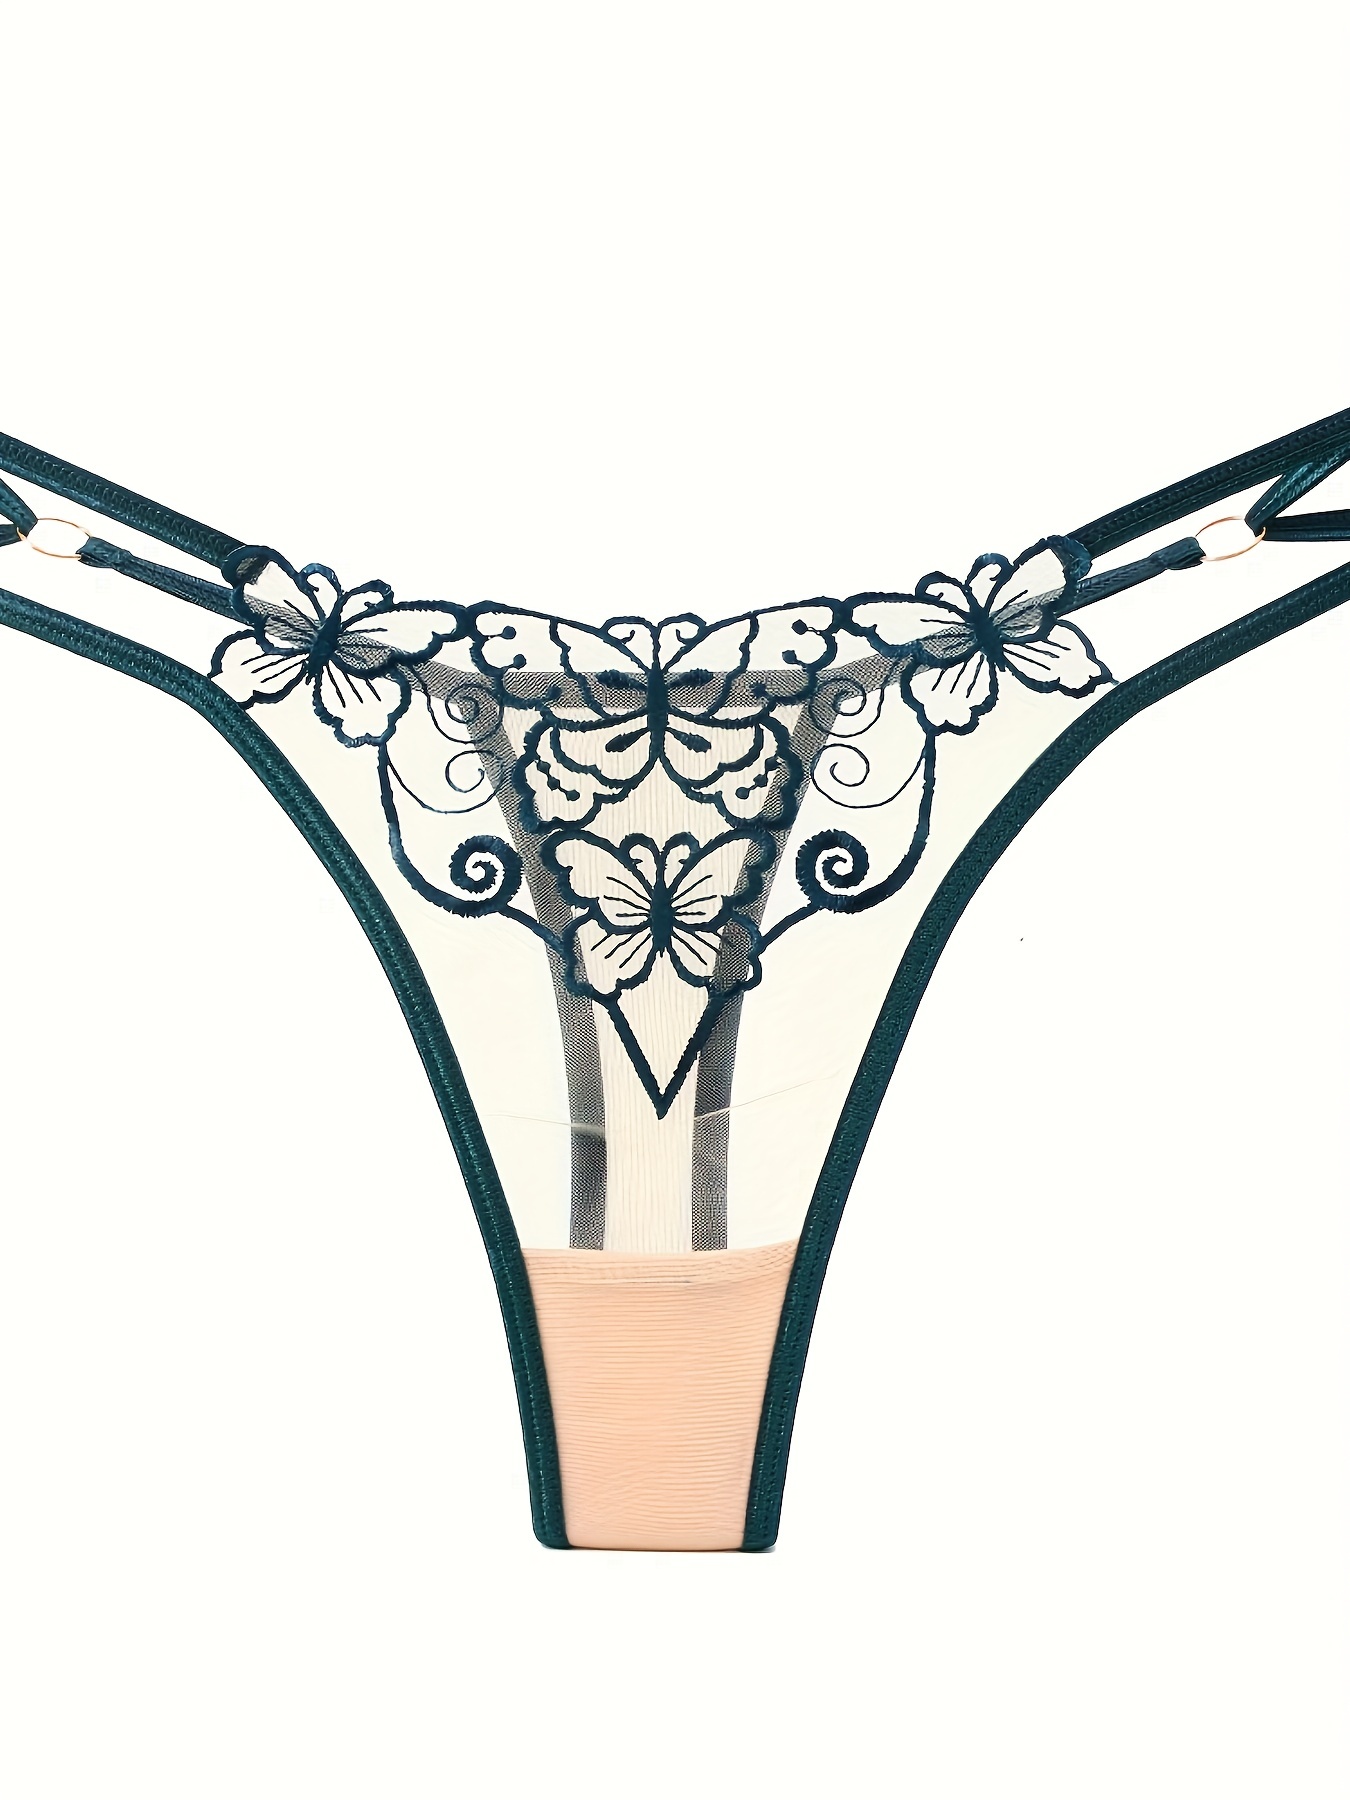 XFLWAM Sheer Mesh Panties for Women Floral Lace Embroidered Underwear  Briefs See Through Thongs G-string Underpants Black M 